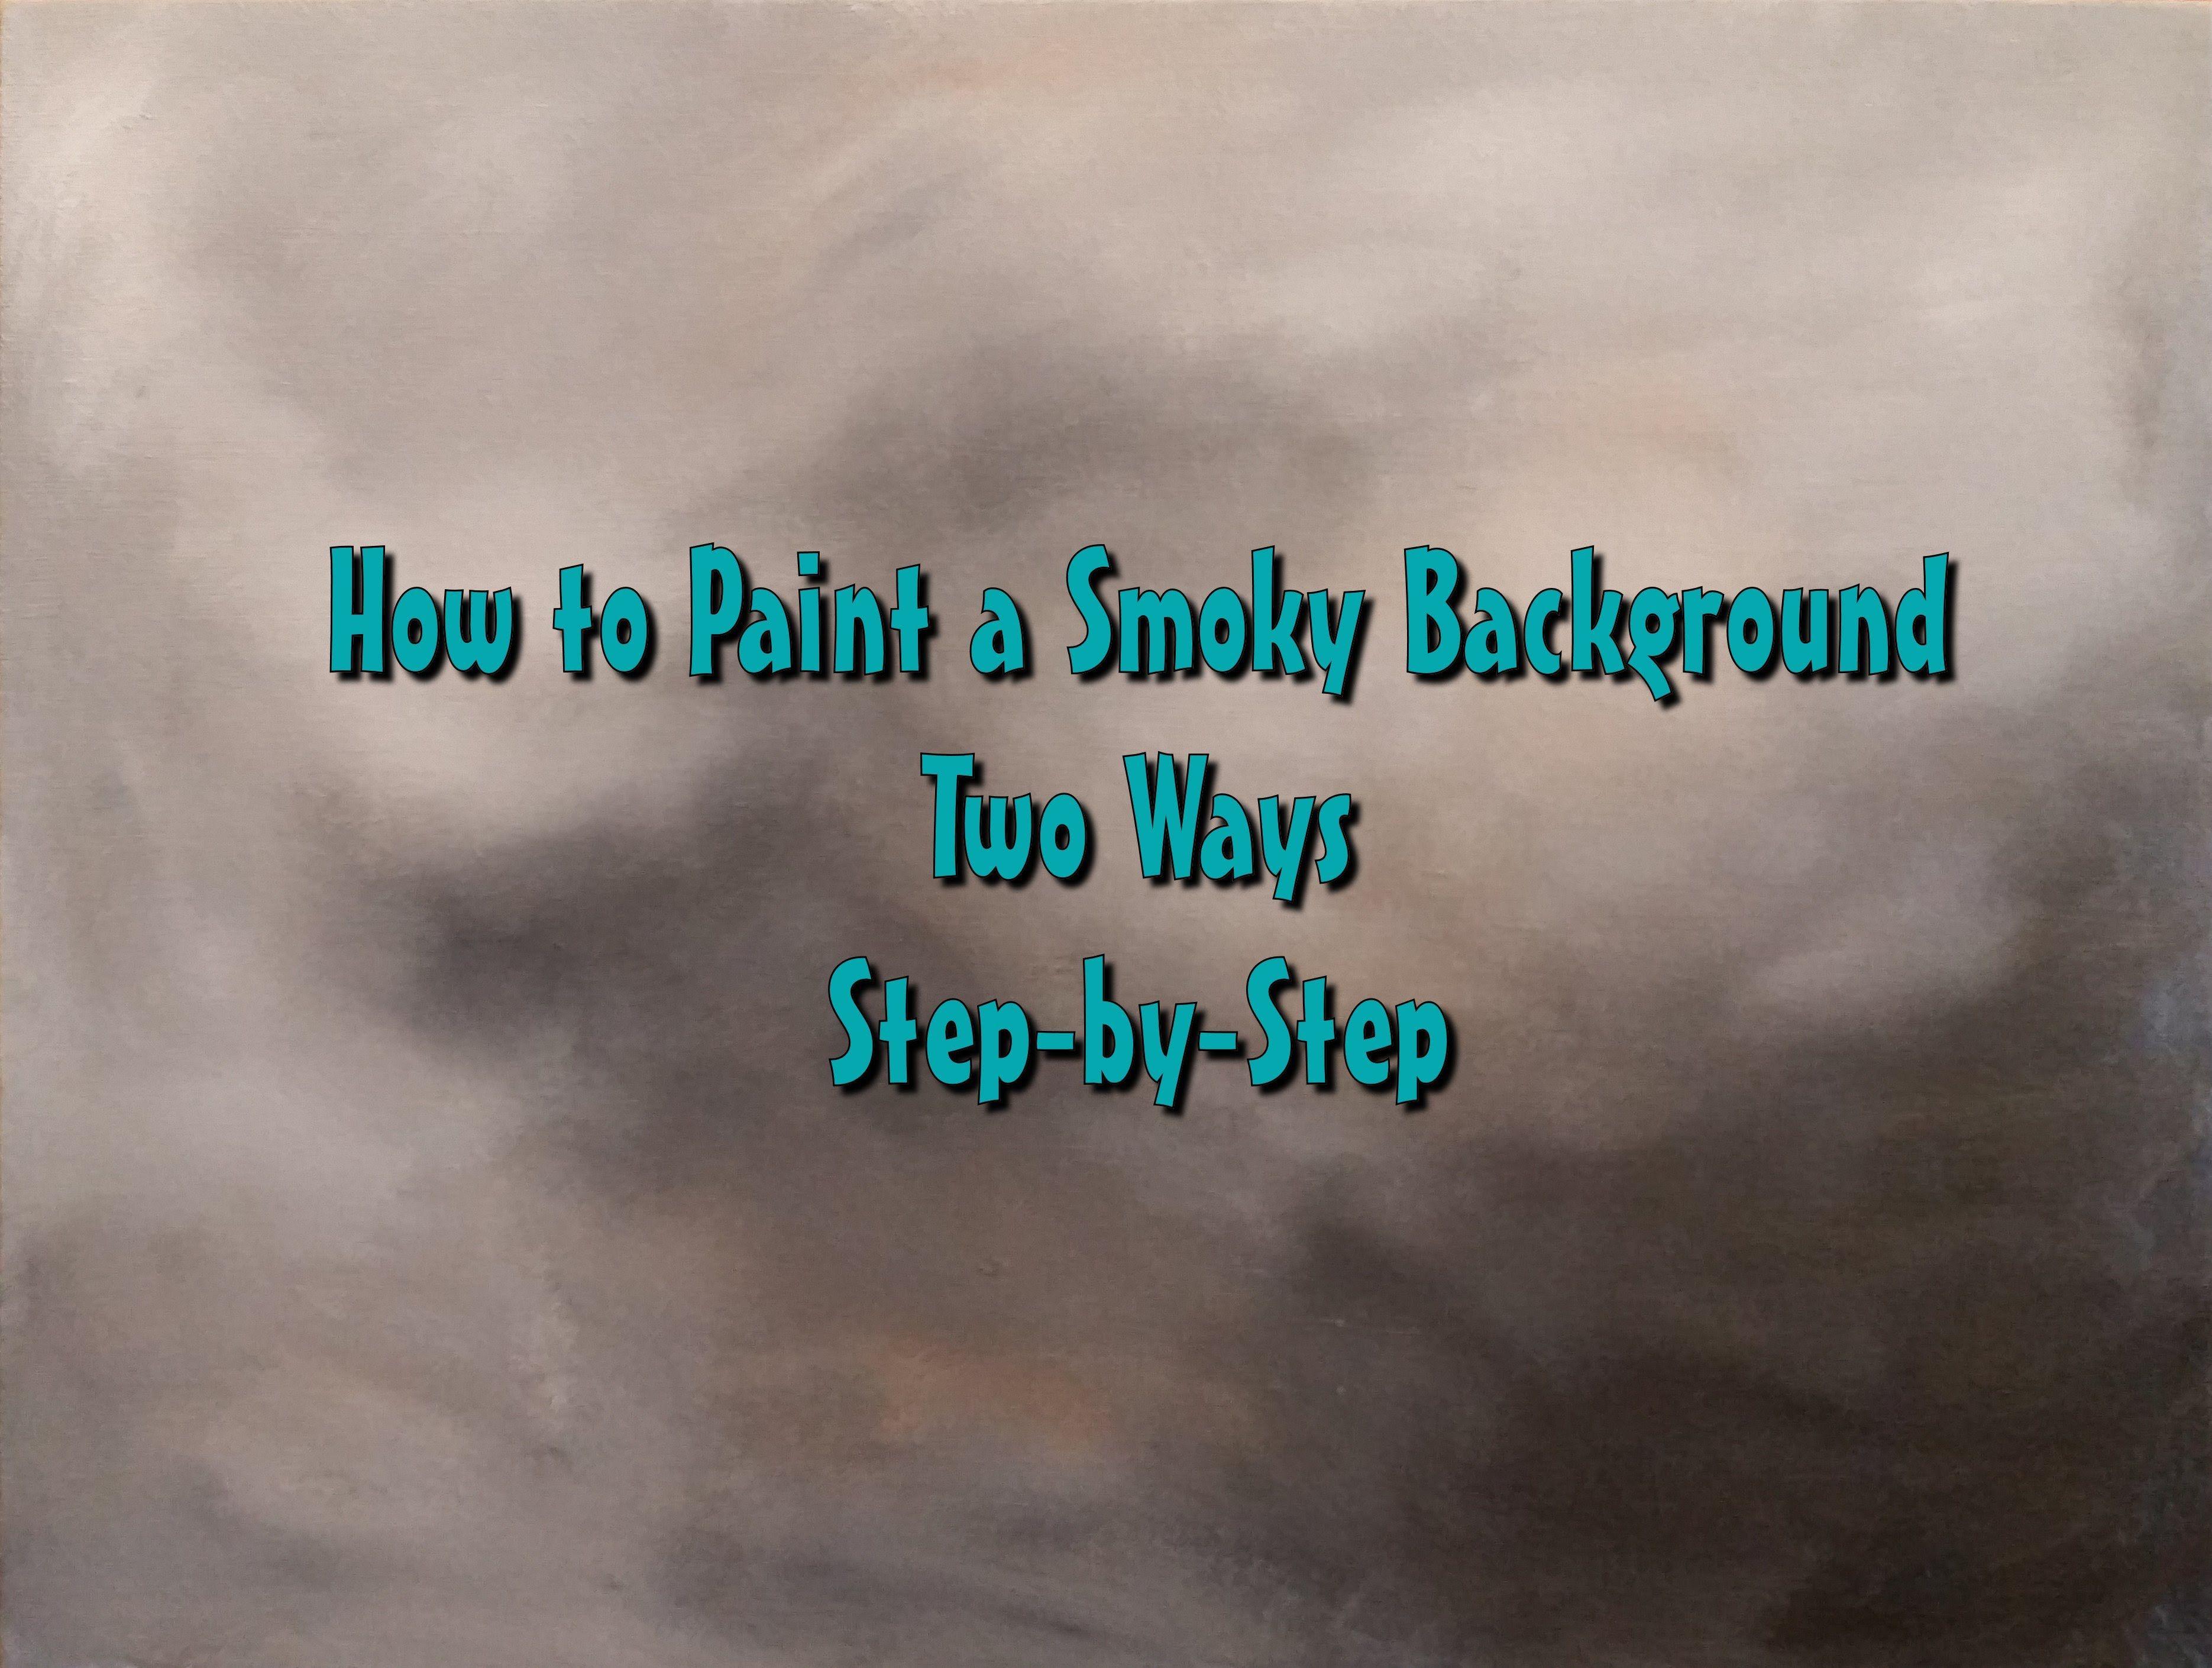 Painting Smoky Background Two Ways by Step Acrylic Painting